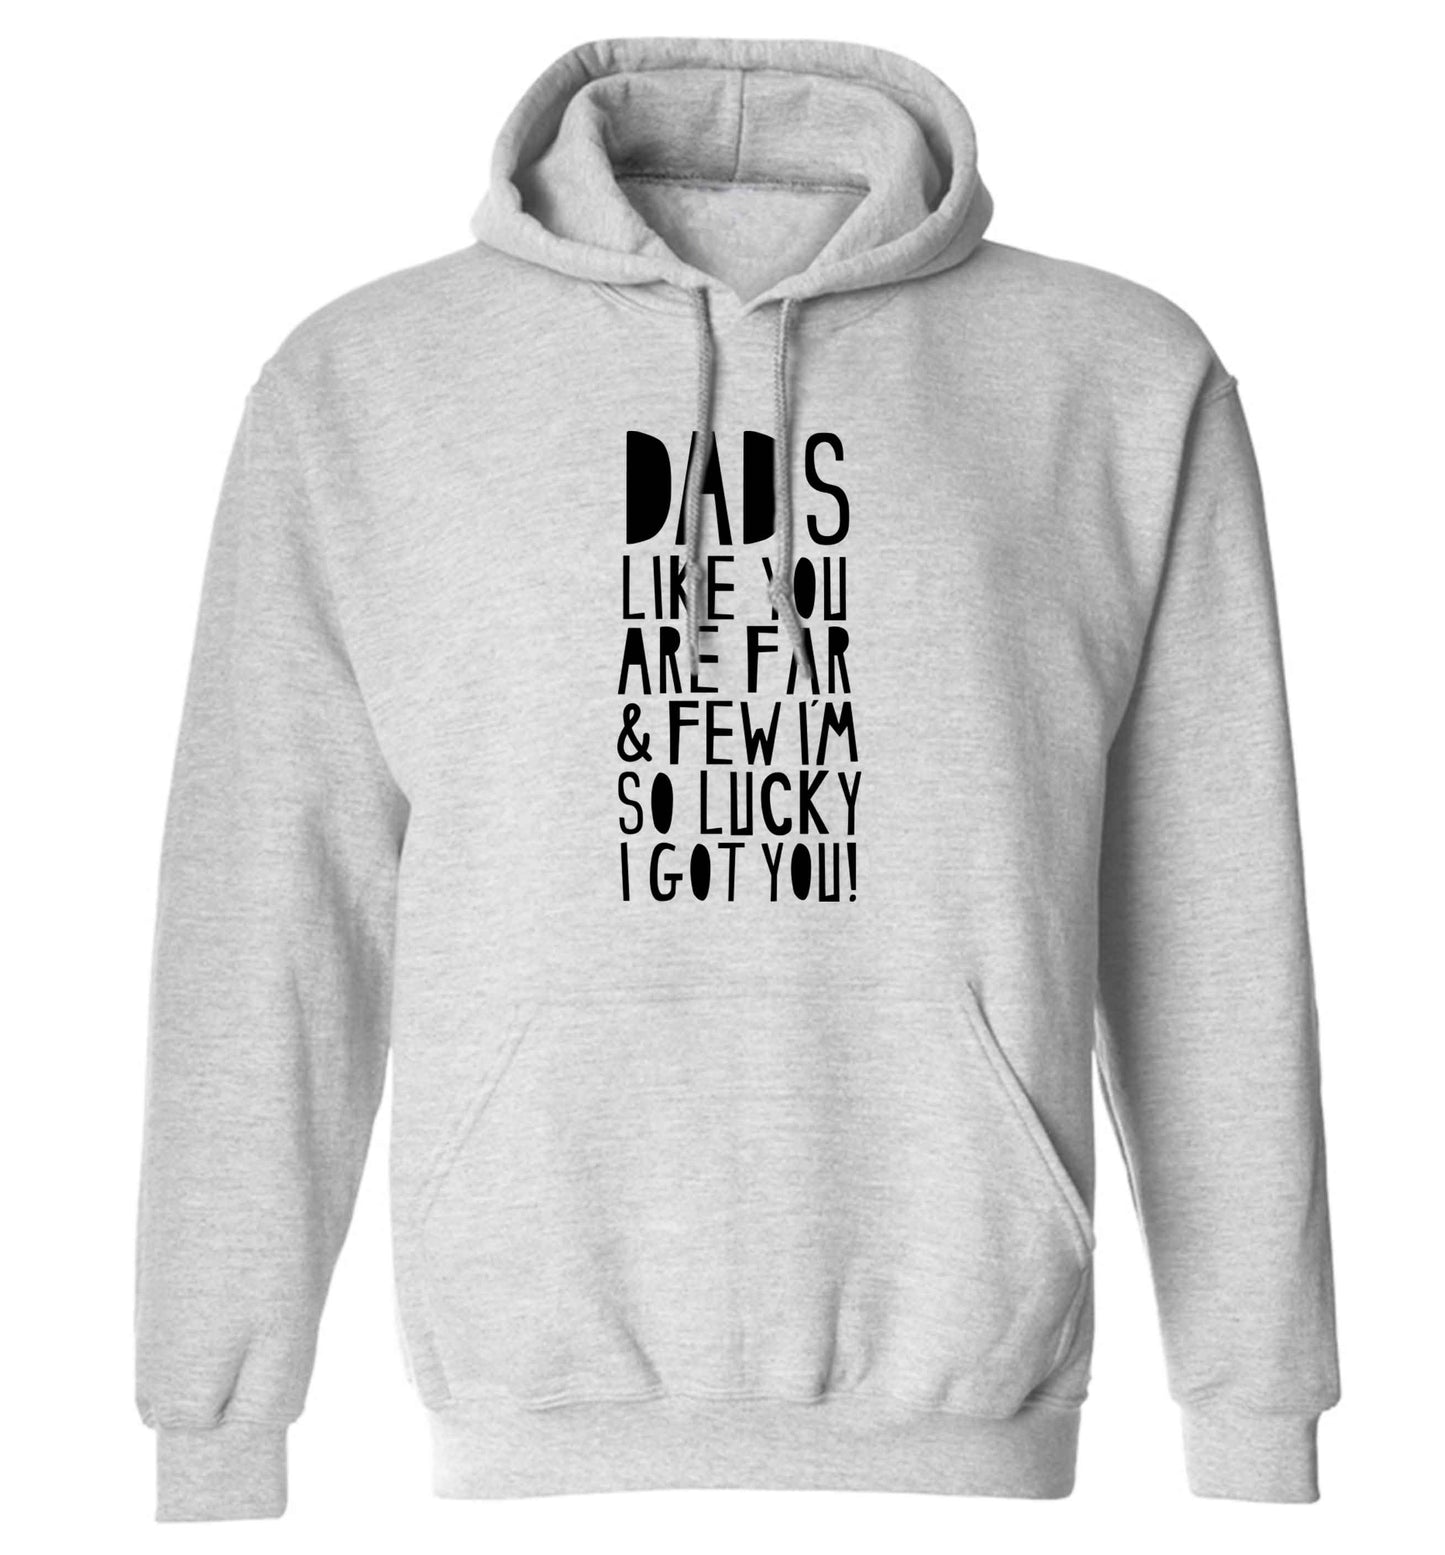 Dads like you are far and few I'm so luck I got you! adults unisex grey hoodie 2XL